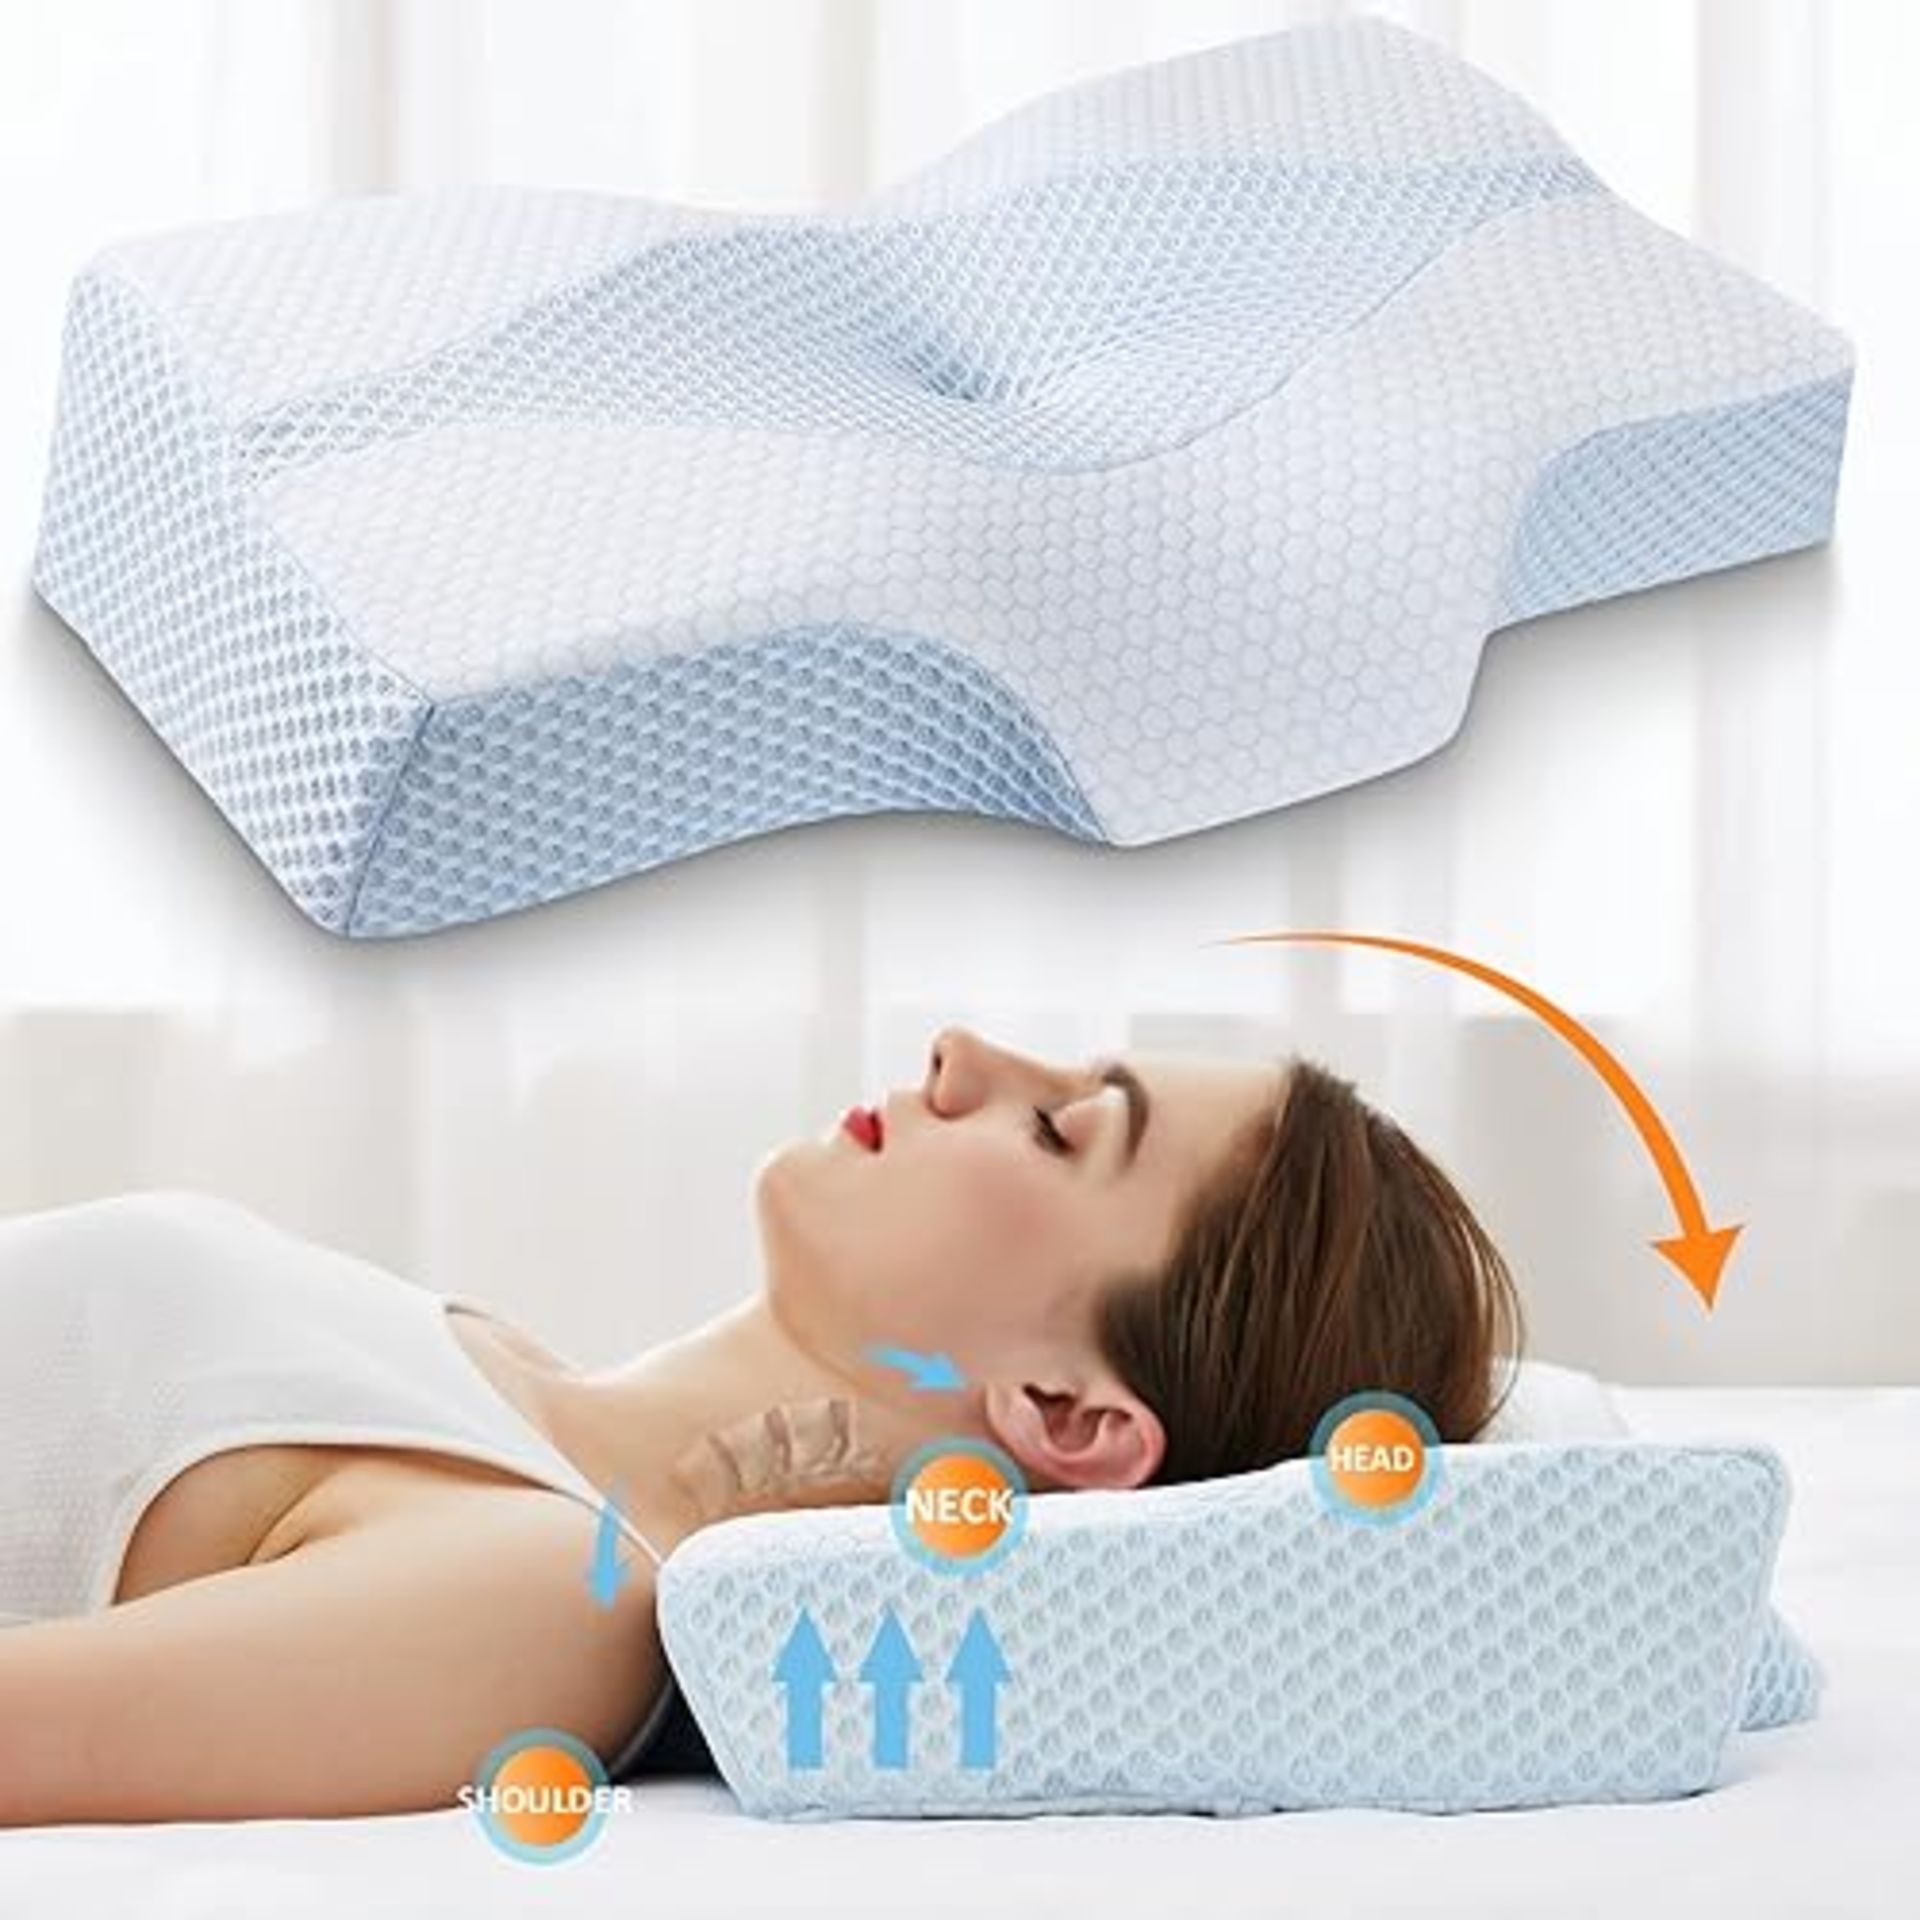 Memory Foam Pillow for Sleeping, Cervical Pillow for Neck Pain Relief, Orthopedic Contour Neck Supp